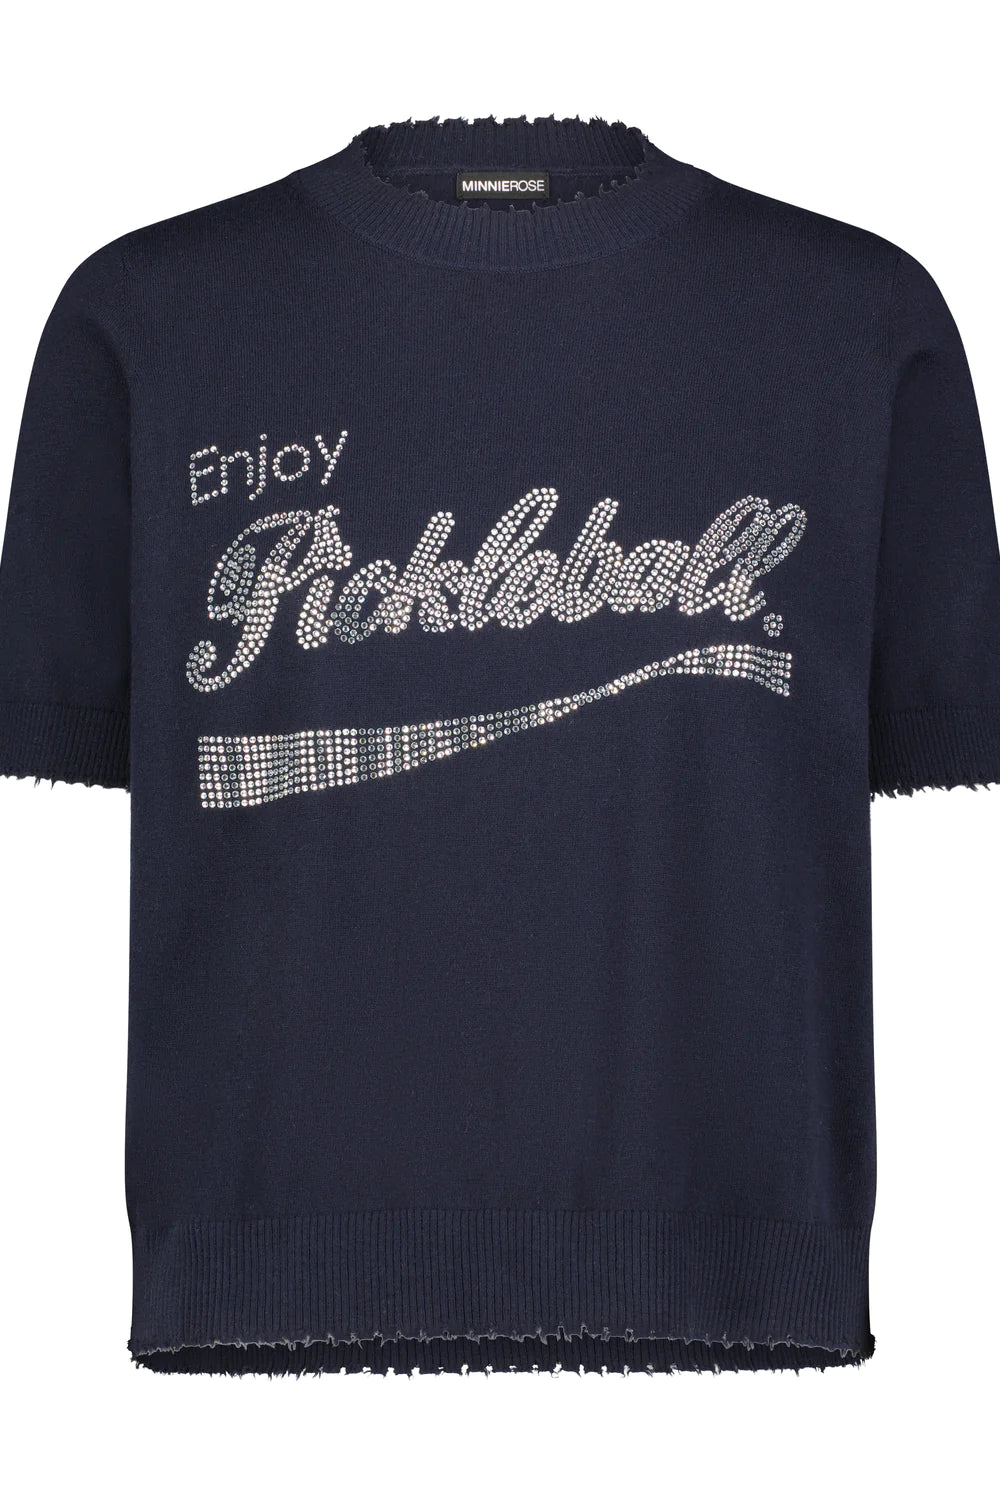 COTTON CASHMERE ENJOY PICKLEBALL BLING FRAYED NAVY SWEATER TEE